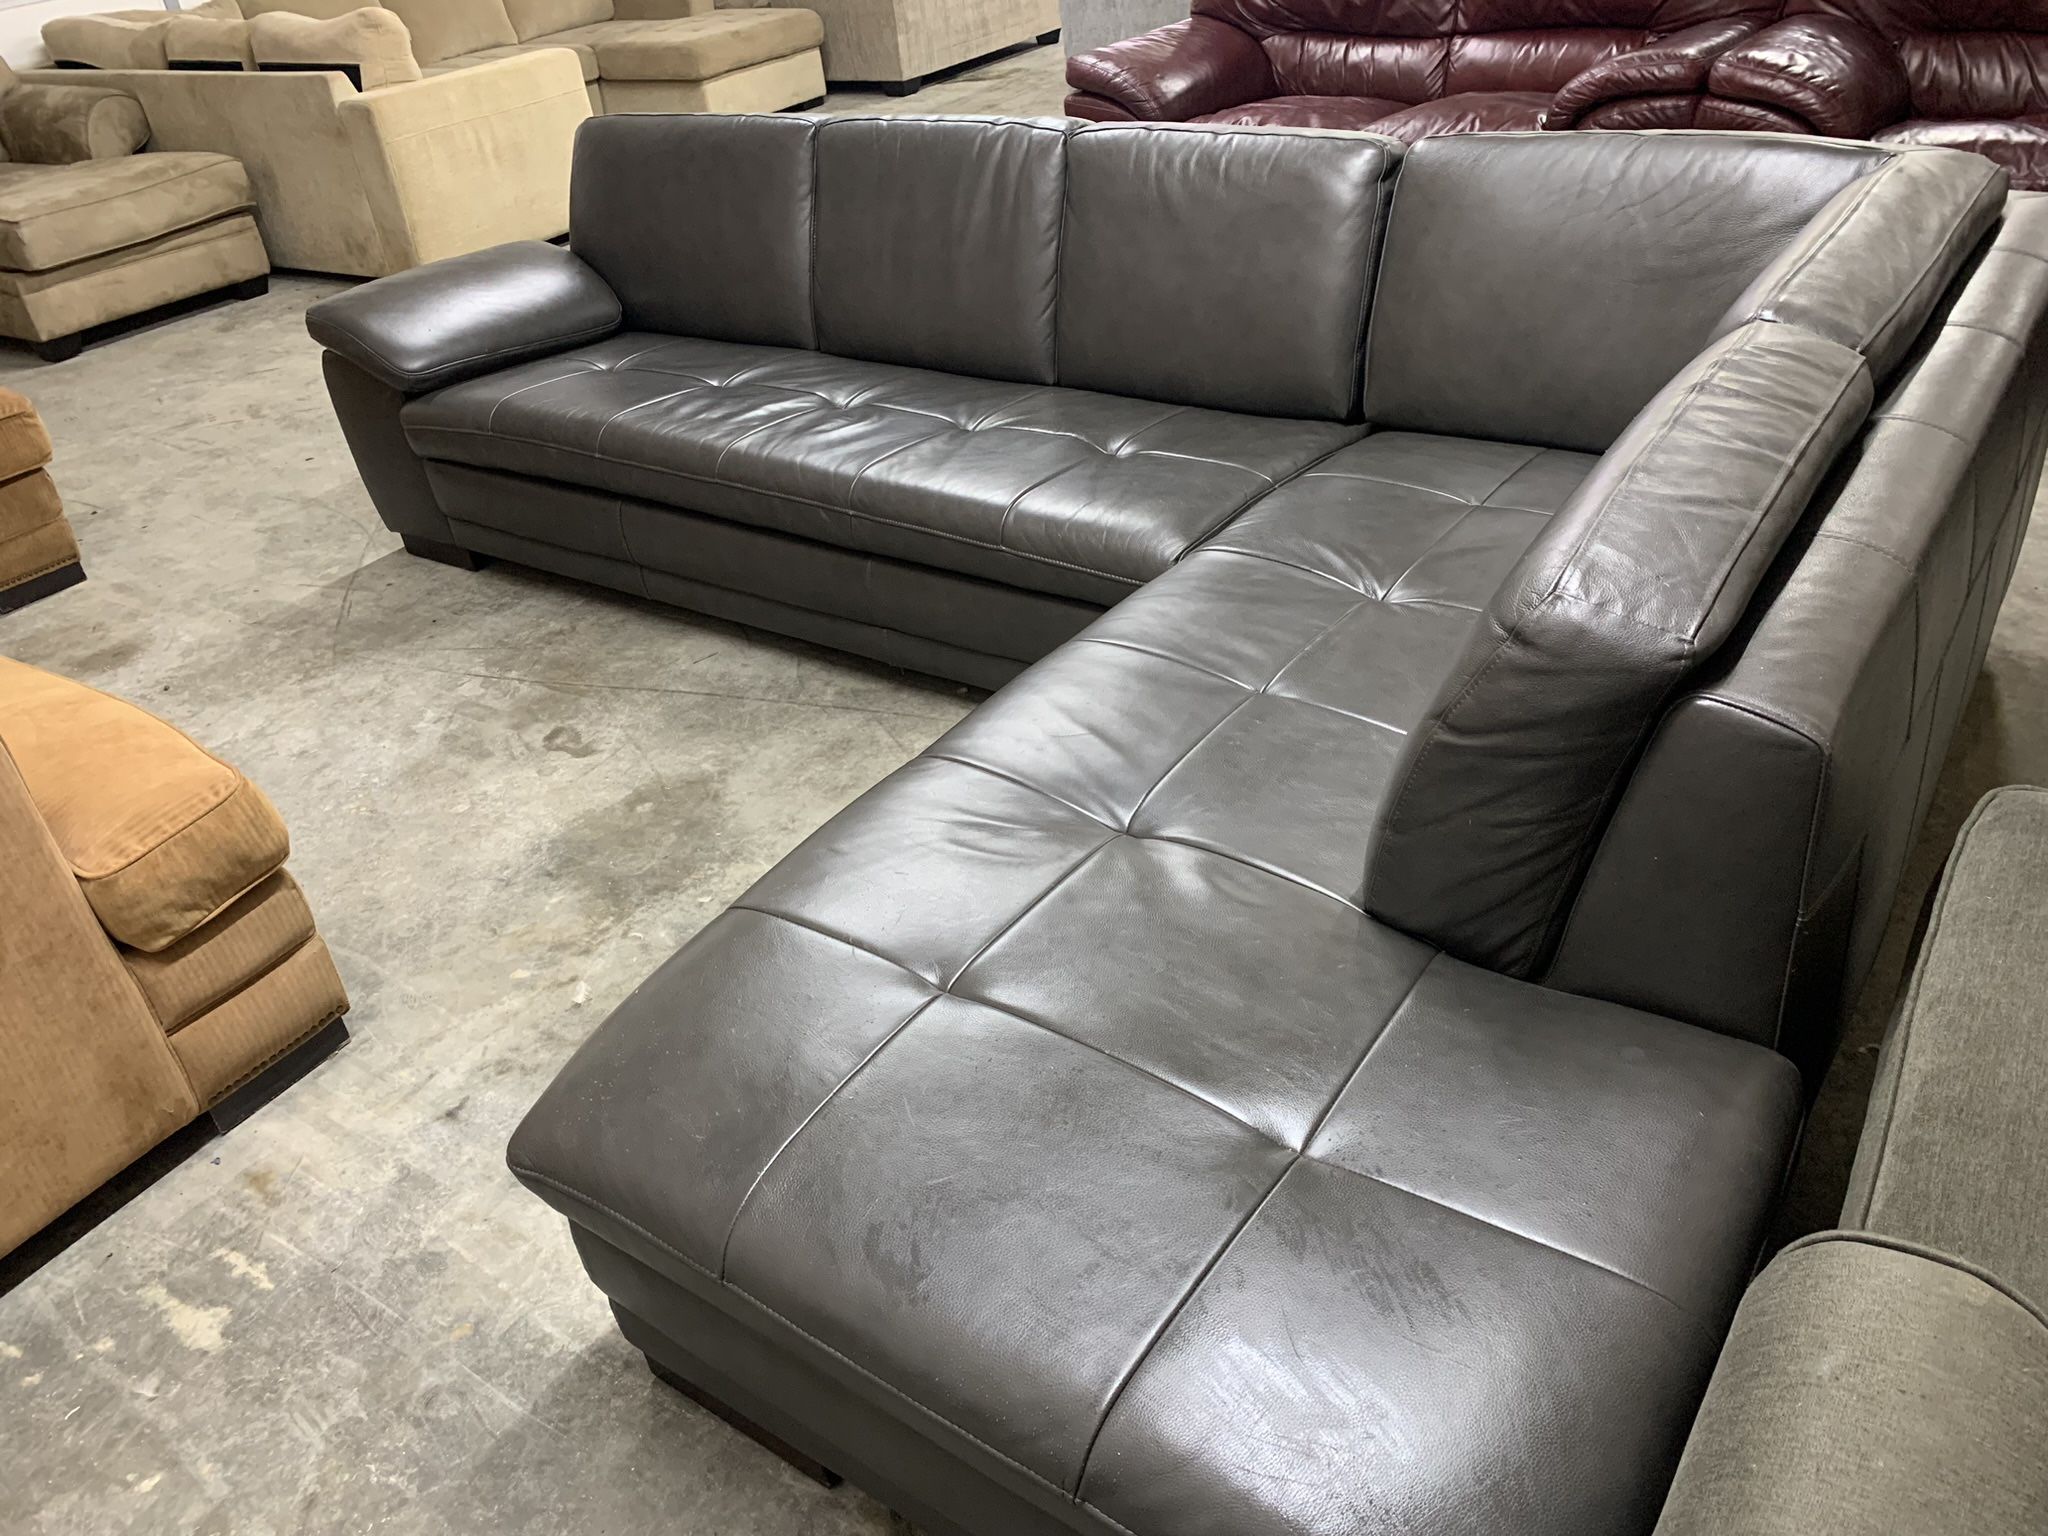 Grey Genuine Leather Sectional Couch “WE DELIVER”